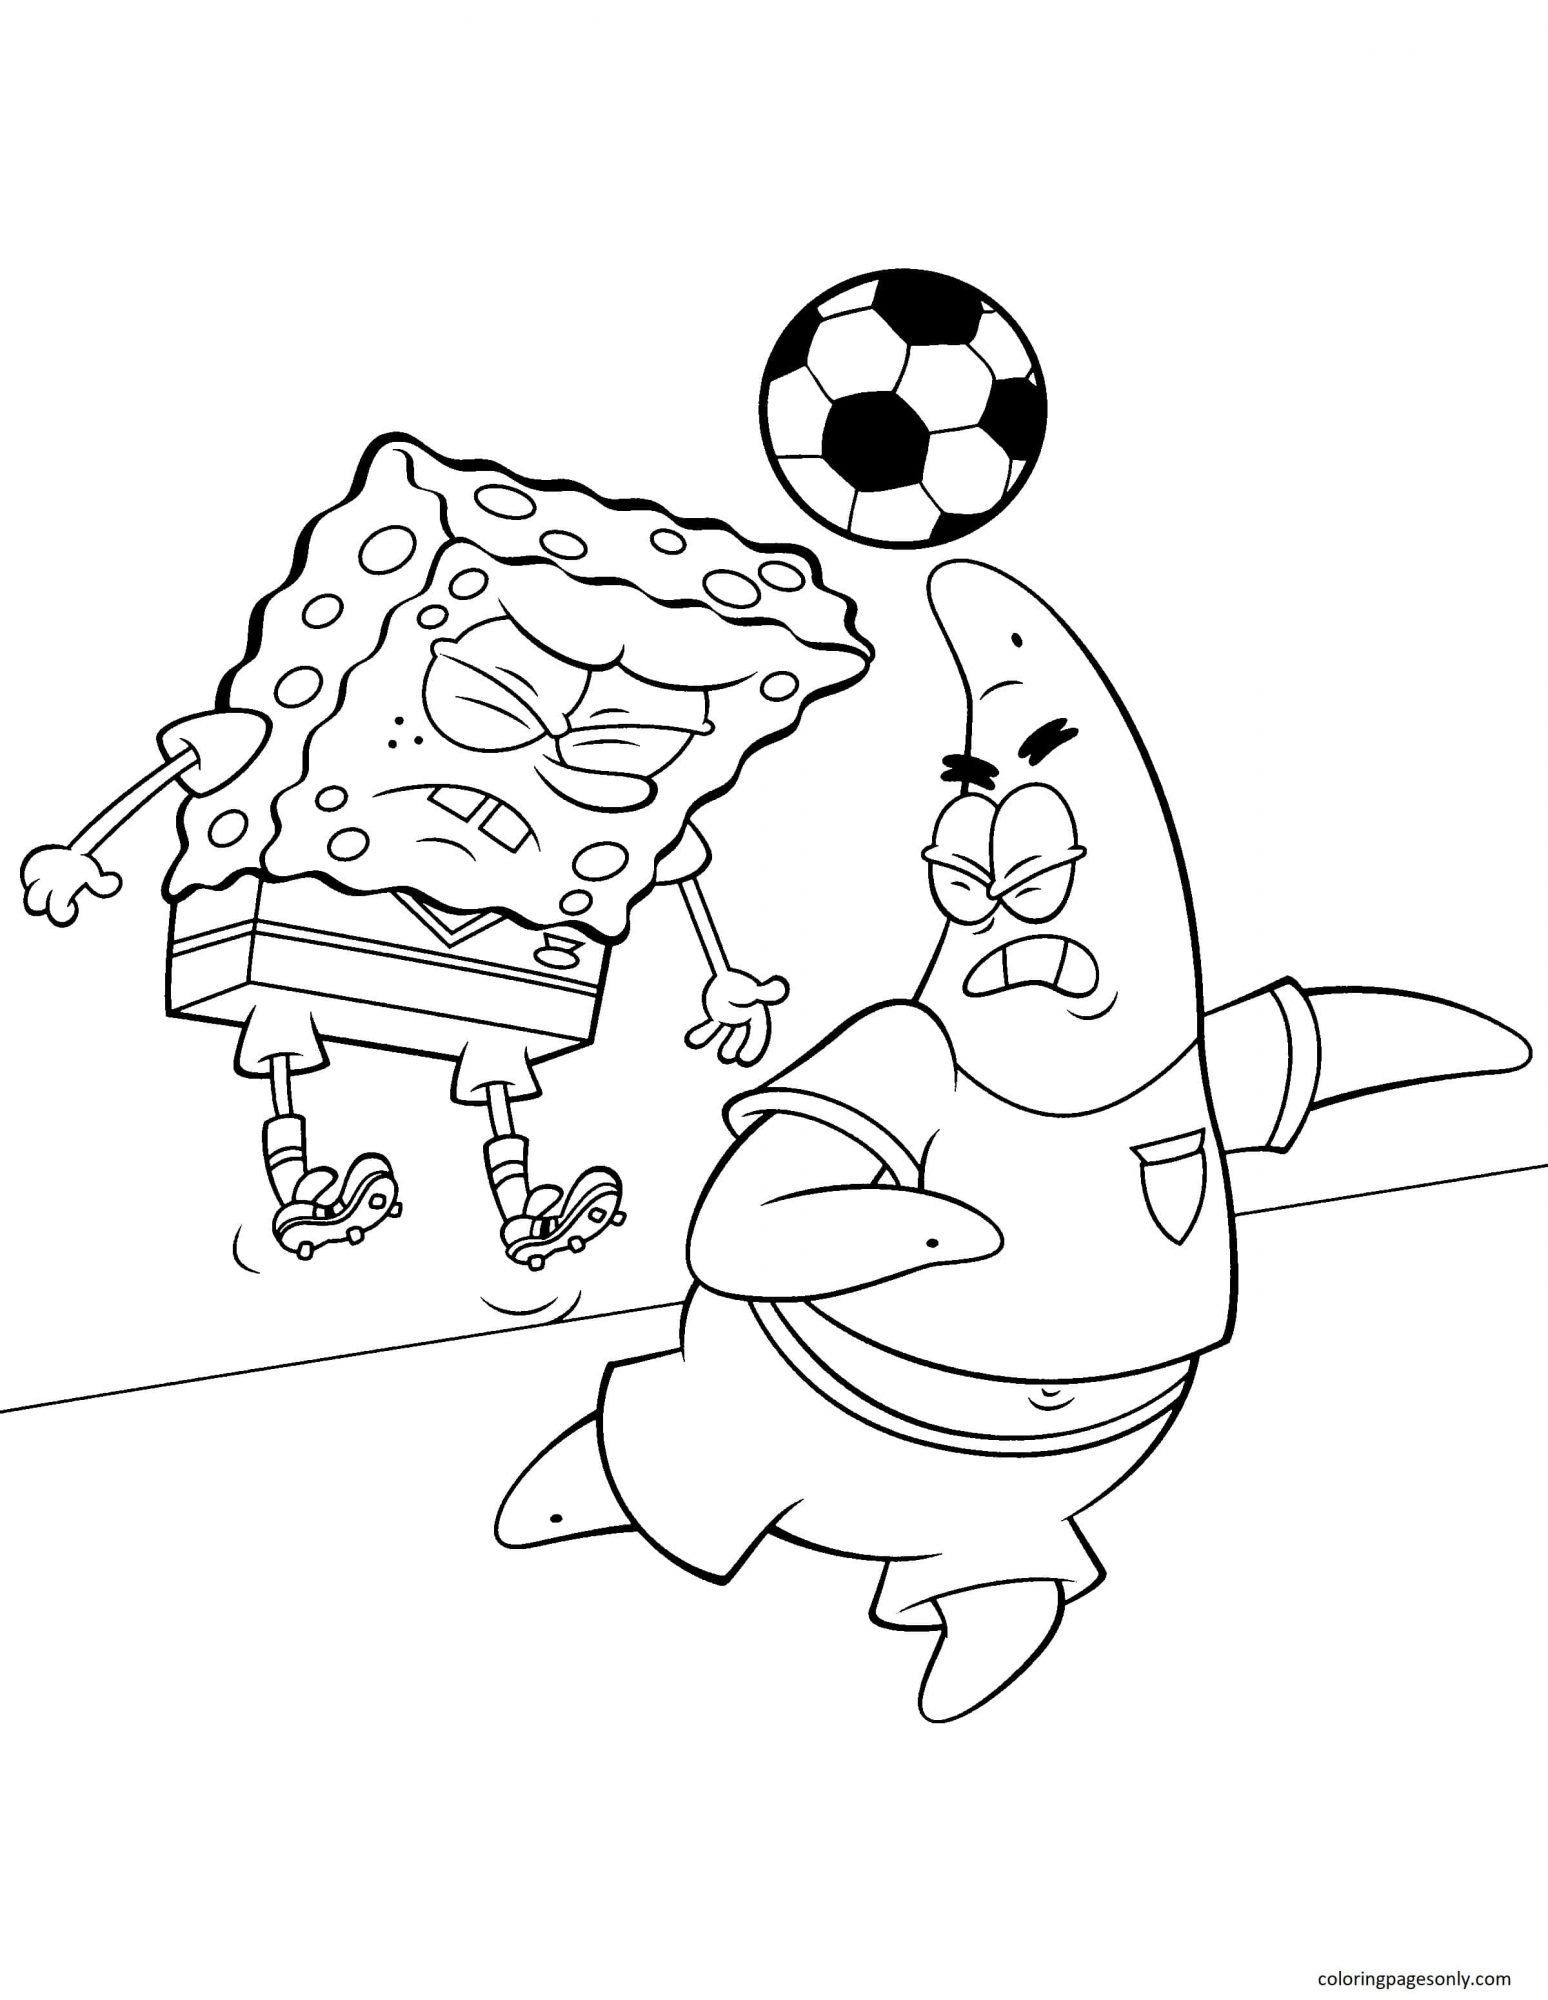 Patrick And Spongebob 3 Coloring Pages